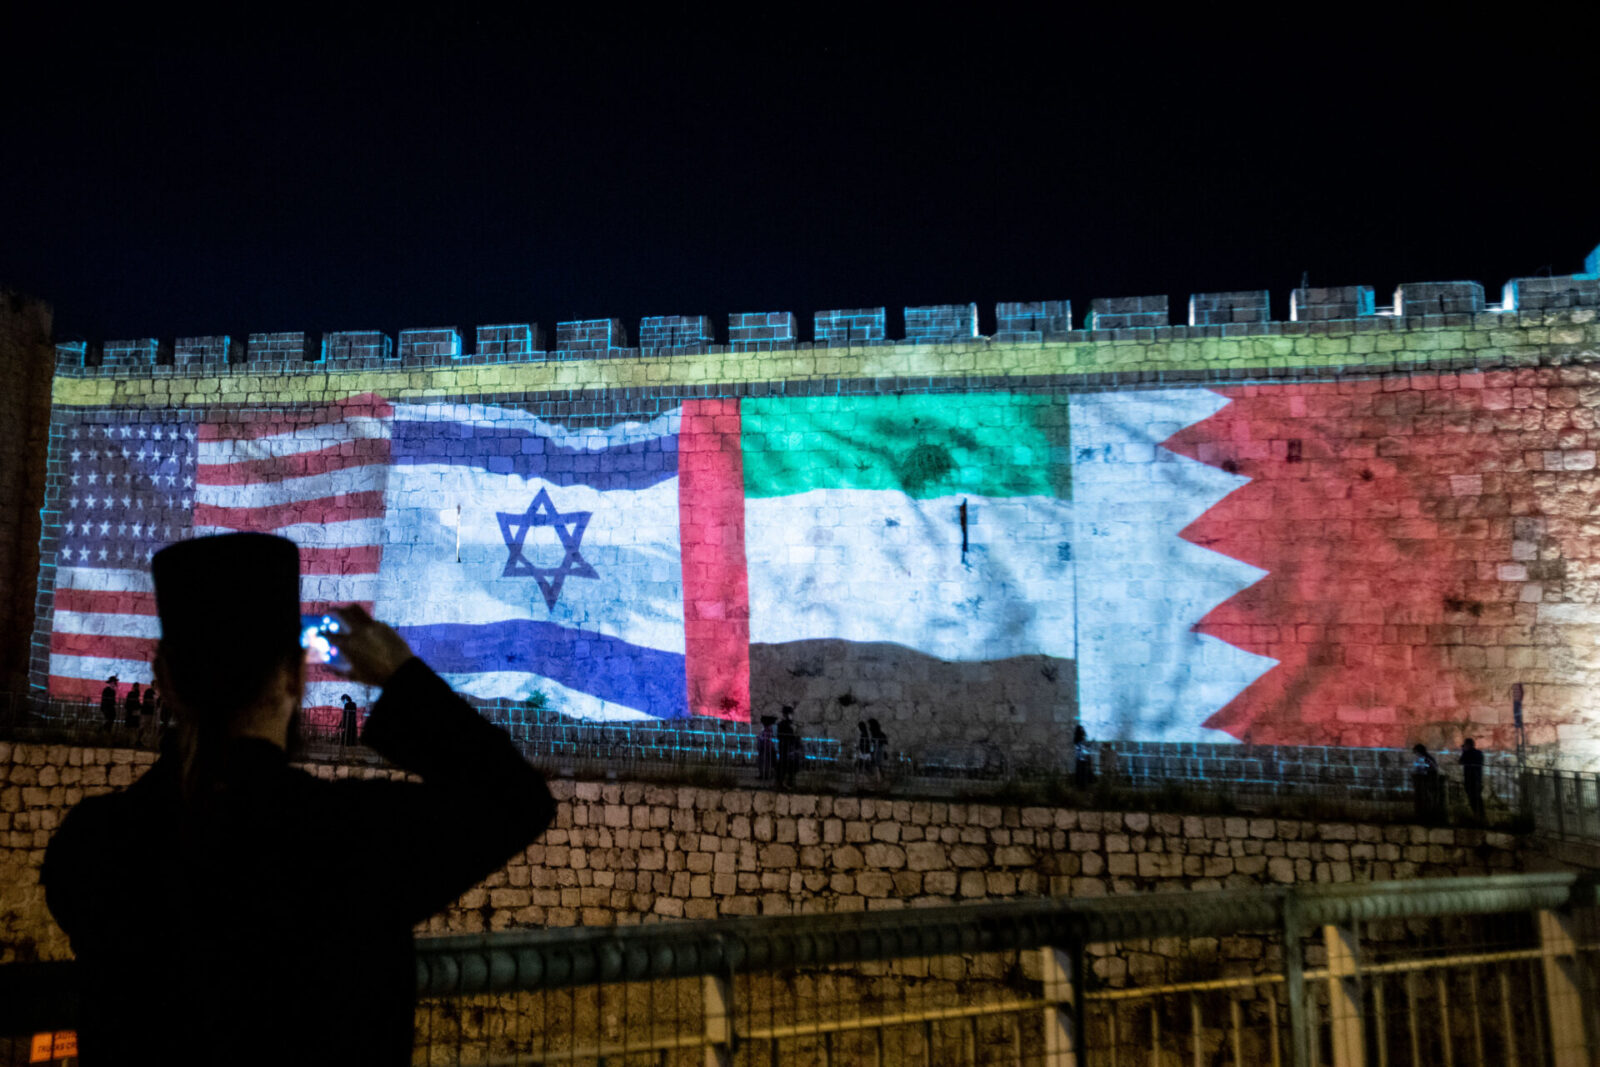 The flags of the US, United Arab Emirates, Israel and Bahrain are screened on the walls of Jerusalem's Old City, on September 15, 2020. Photo by Yonatan Sindel/Flash90